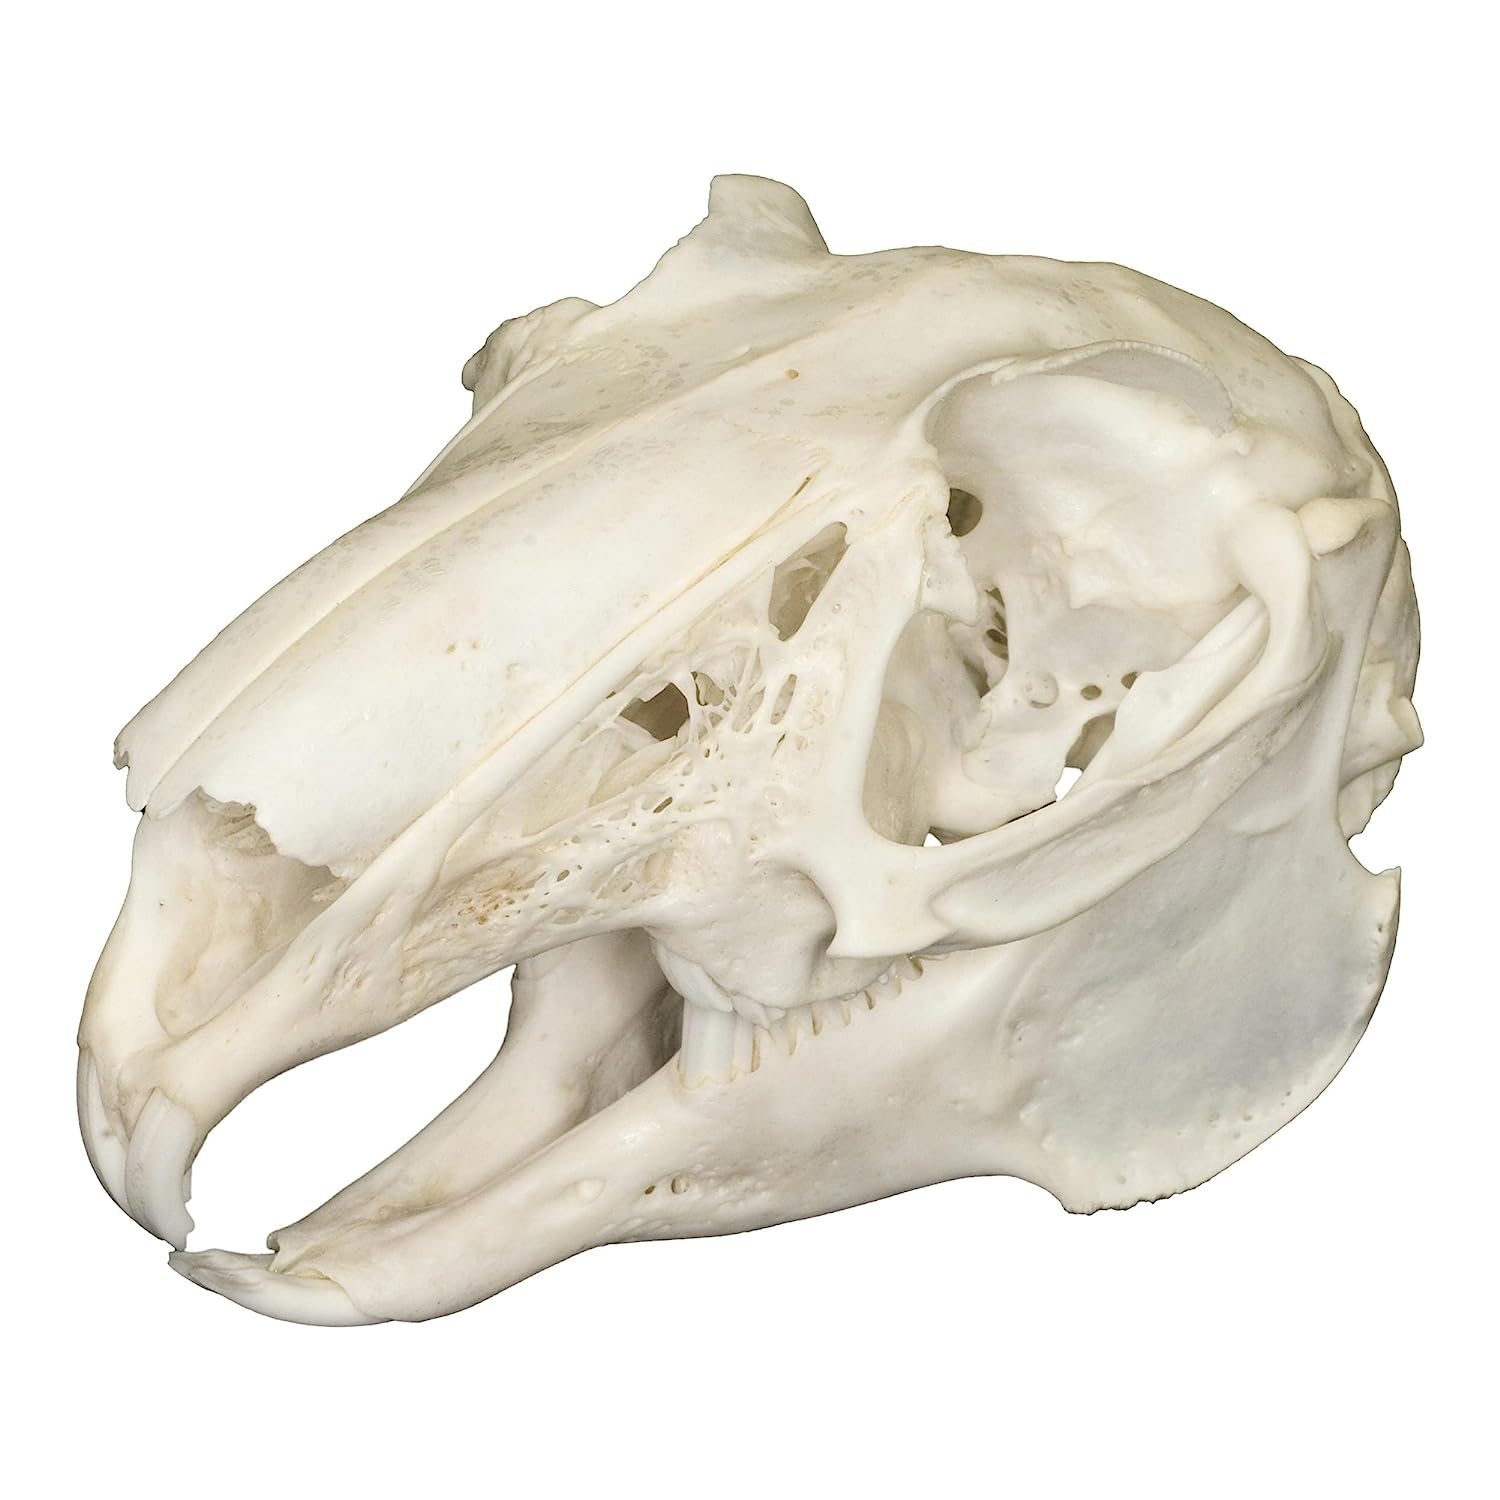 Real Jackrabbit Skull A Quality   price checker   price checker Description Gallery Reviews Variations Additional details